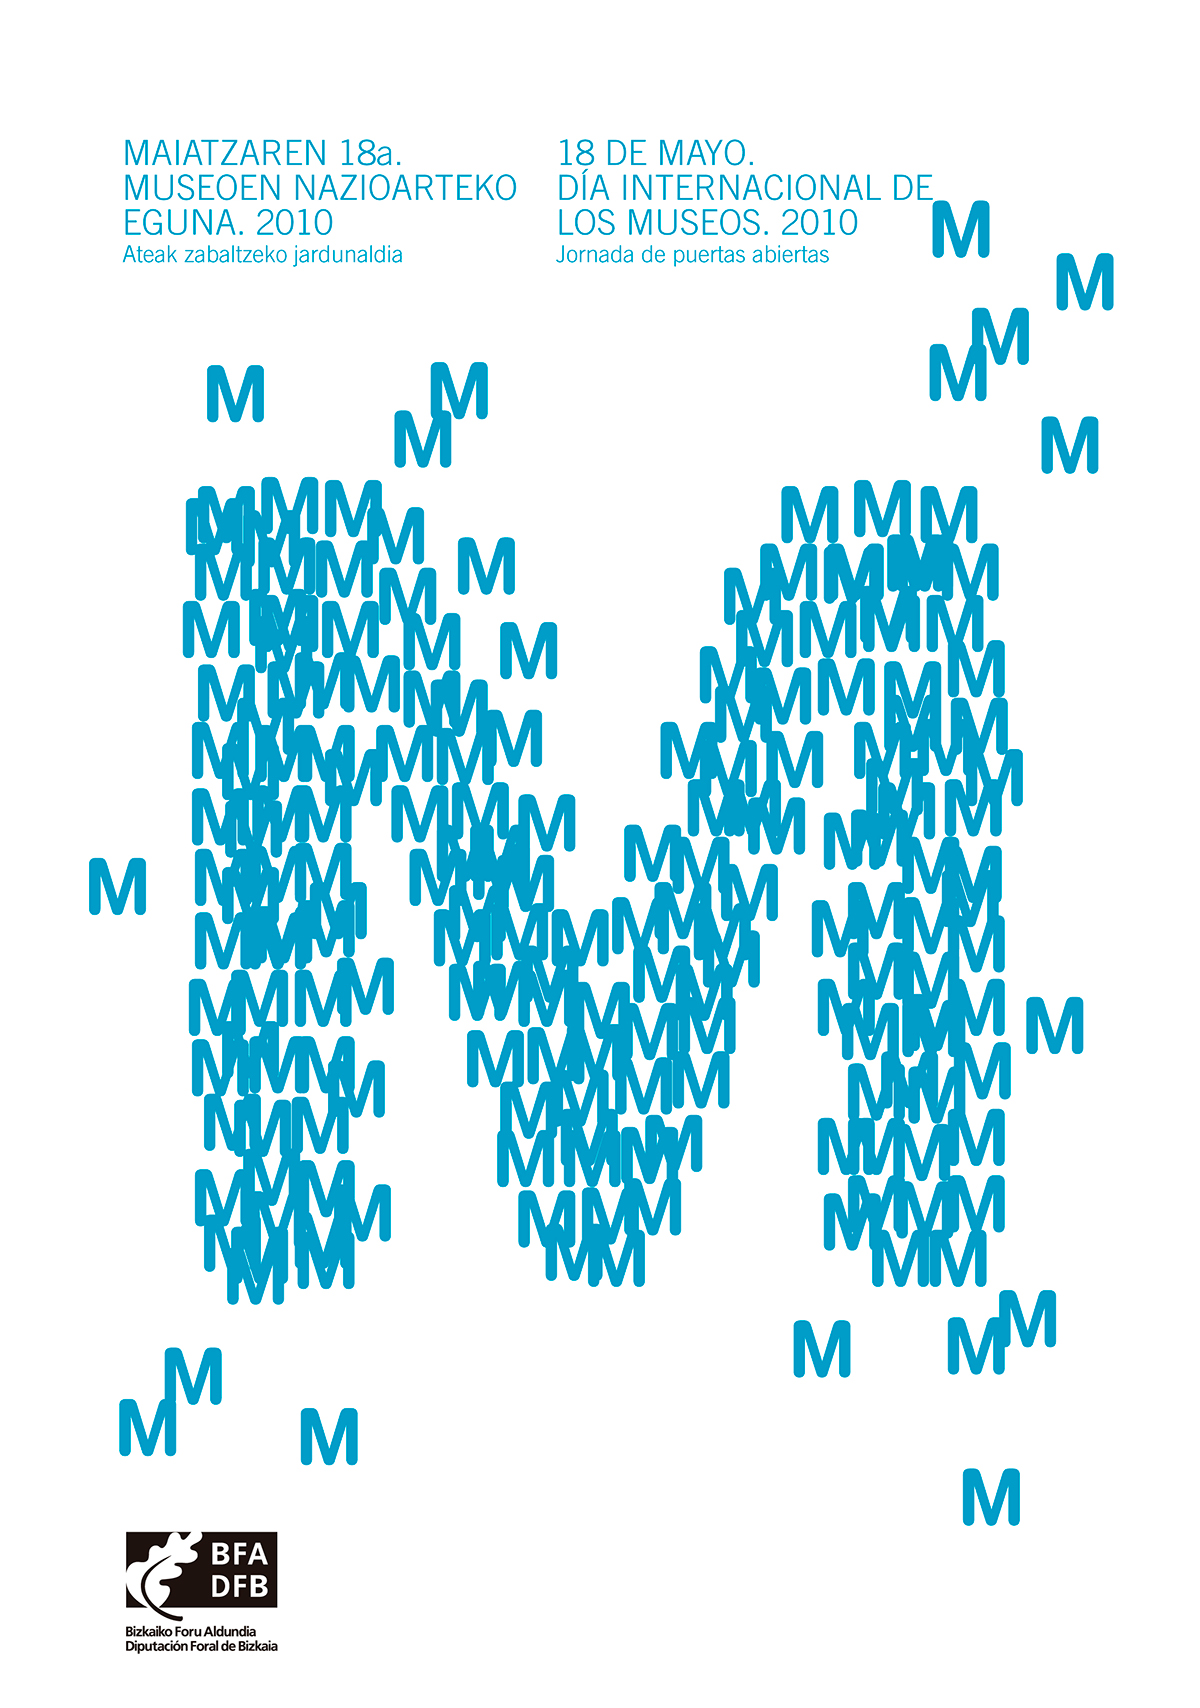 museums international day bilbao INSTITUTIONAL GRAPHIC poster graphic campaign Laus awards logo laus award